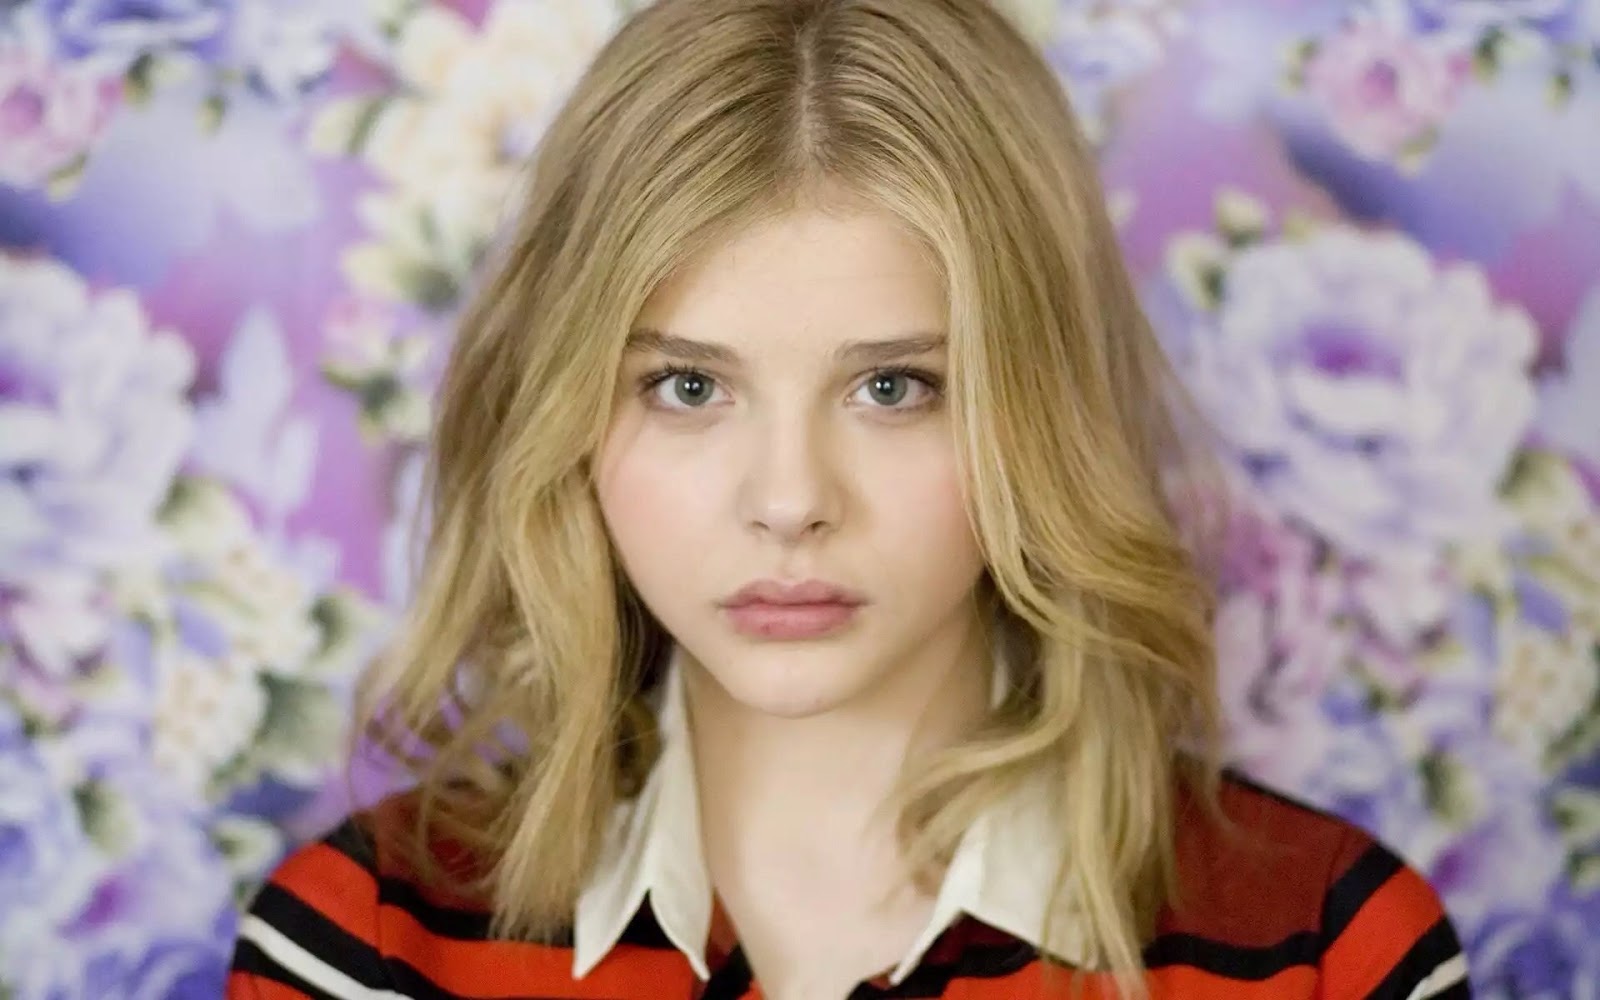 Chloë Grace Moretz Imsges Pictures Photos And Wallpaper Free Hd Wallpapers